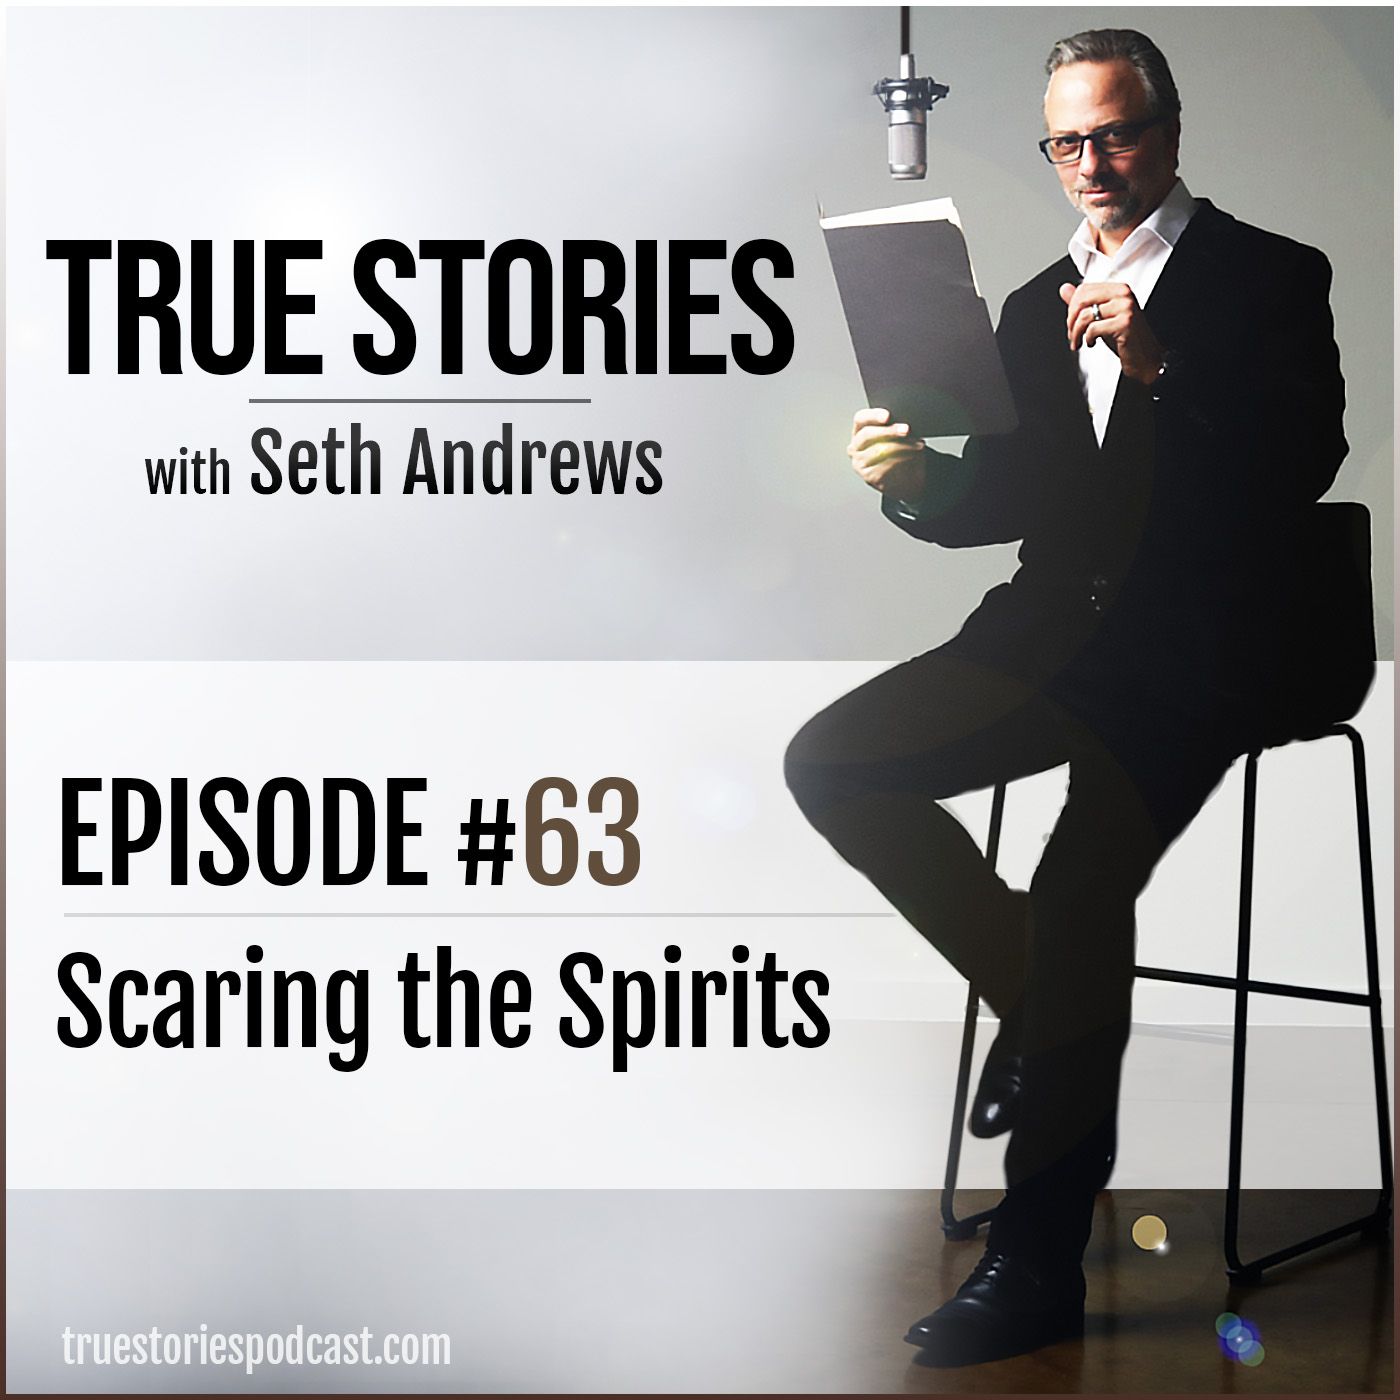 True Stories #63 - Scaring the Spirits